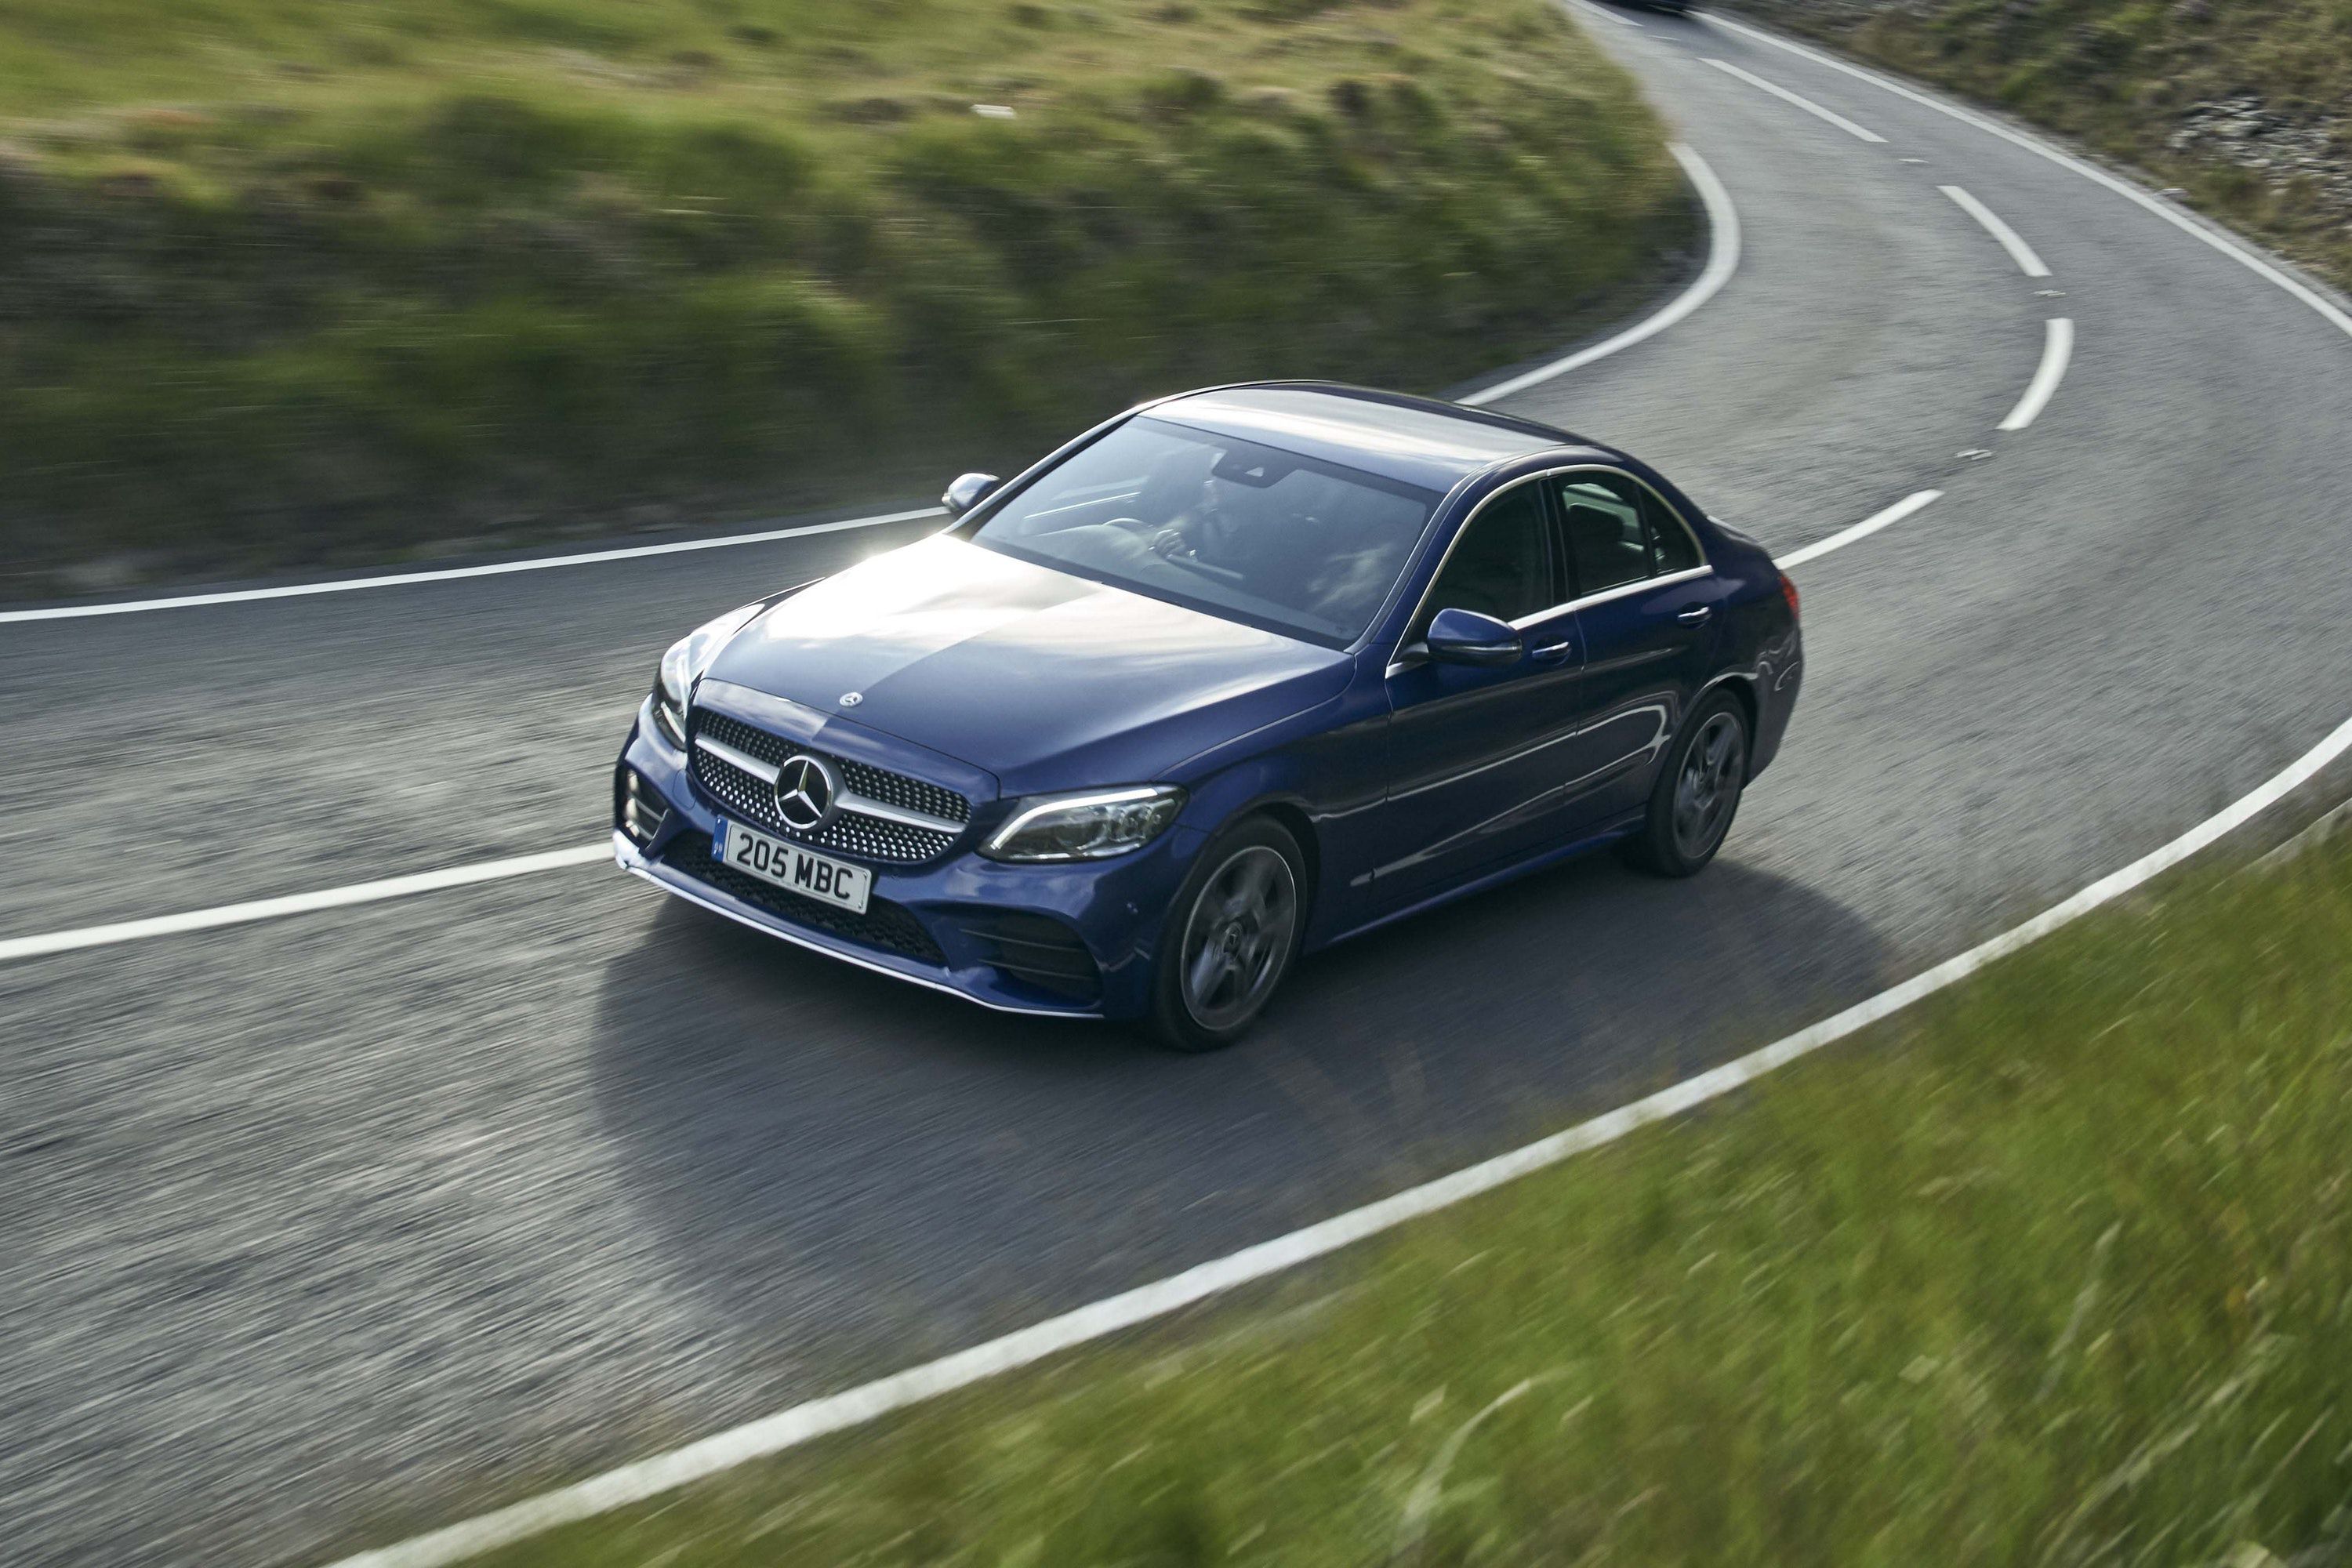 Blue Mercedes-Benz C-Class driving on a road